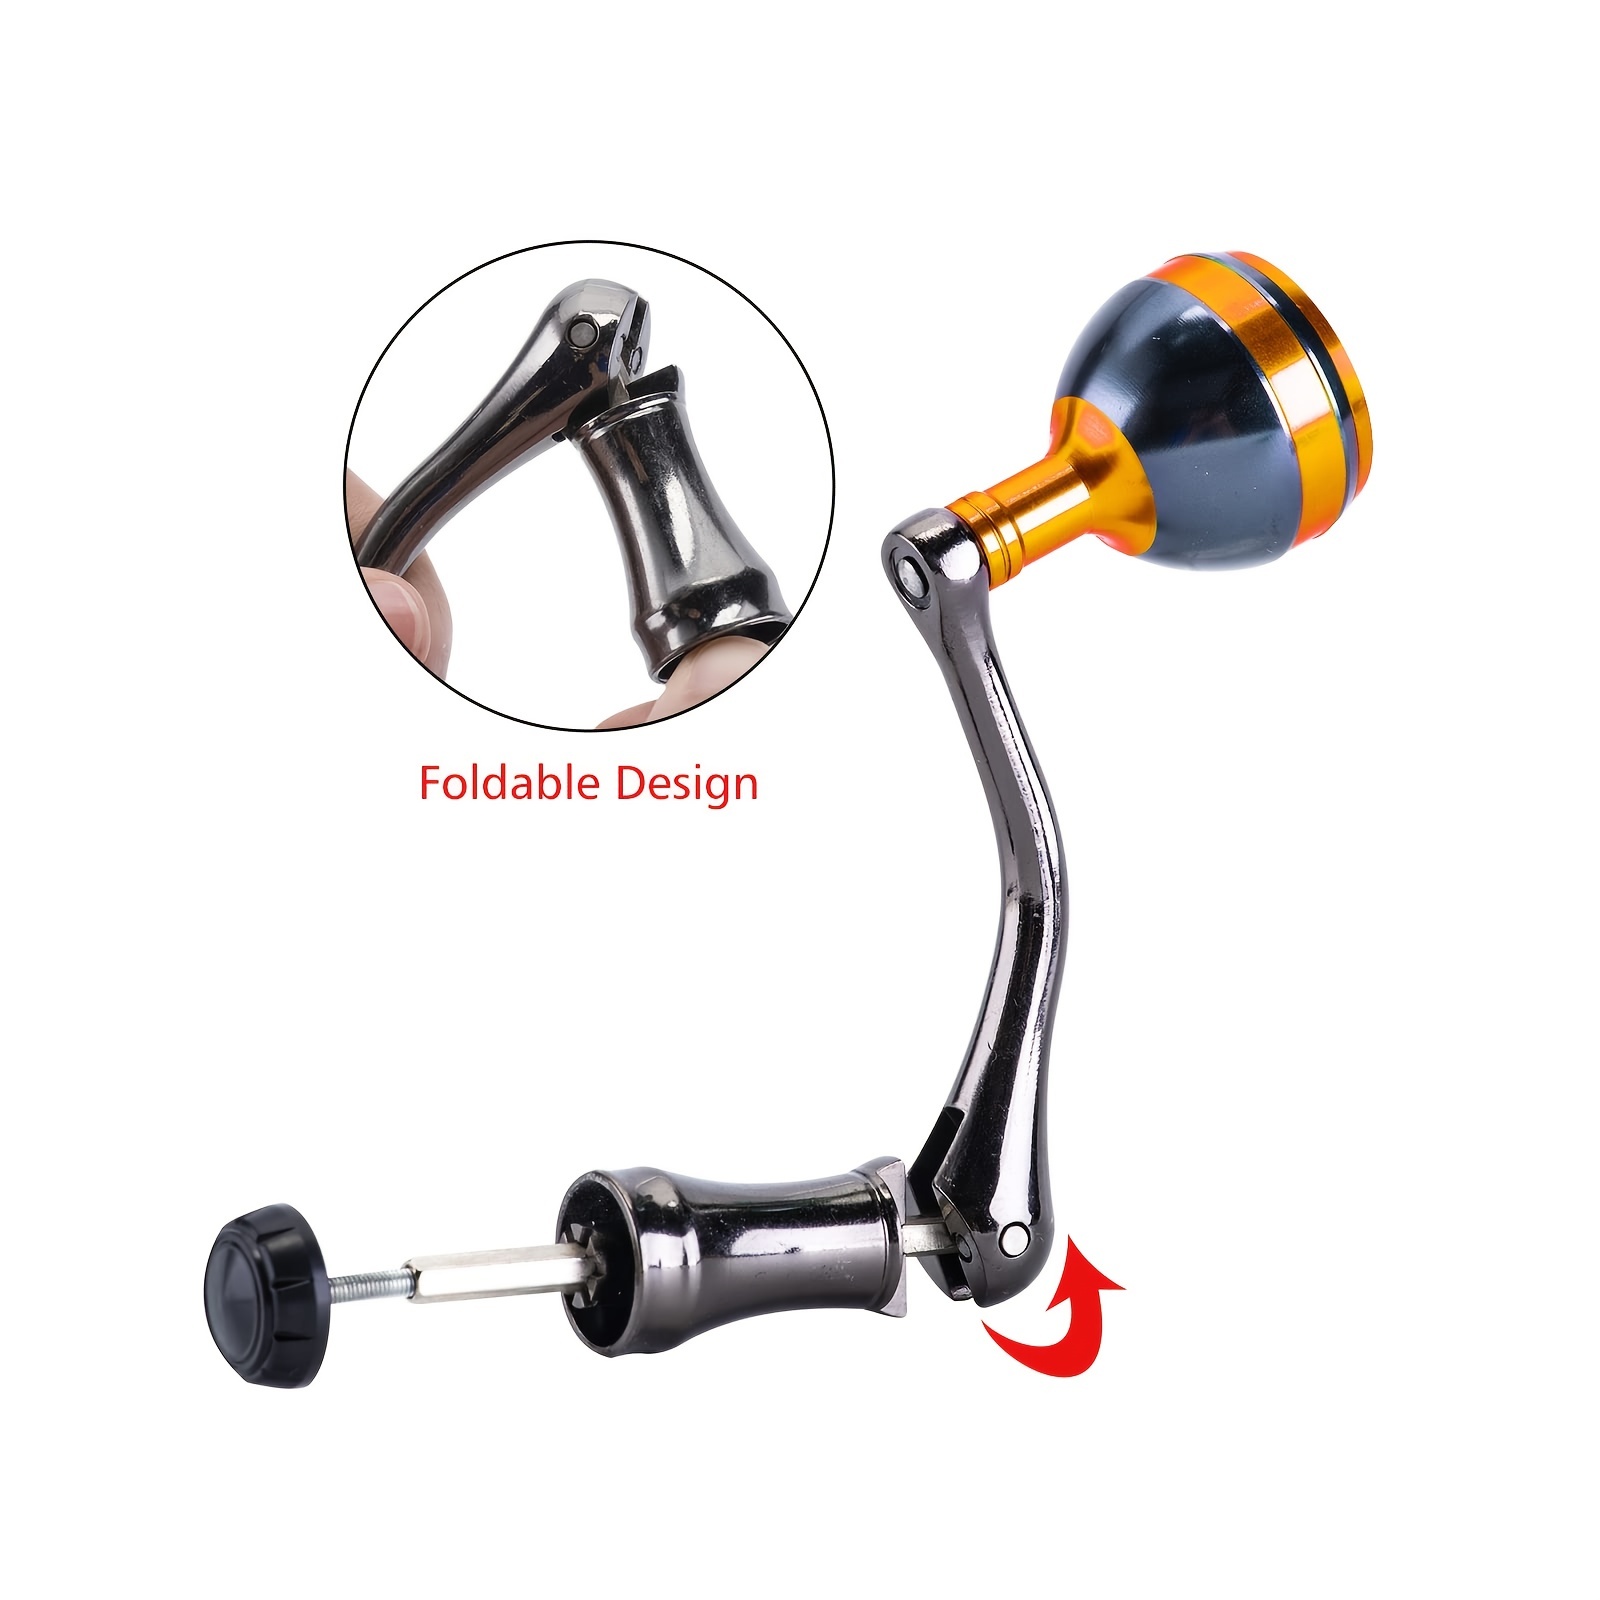 * Golden Spinning Reel Handle - Metal Replacement Handle with Round Power  Knob - Available in 3 Sizes (S/M/L) - Improved Grip and Comfort for Fis